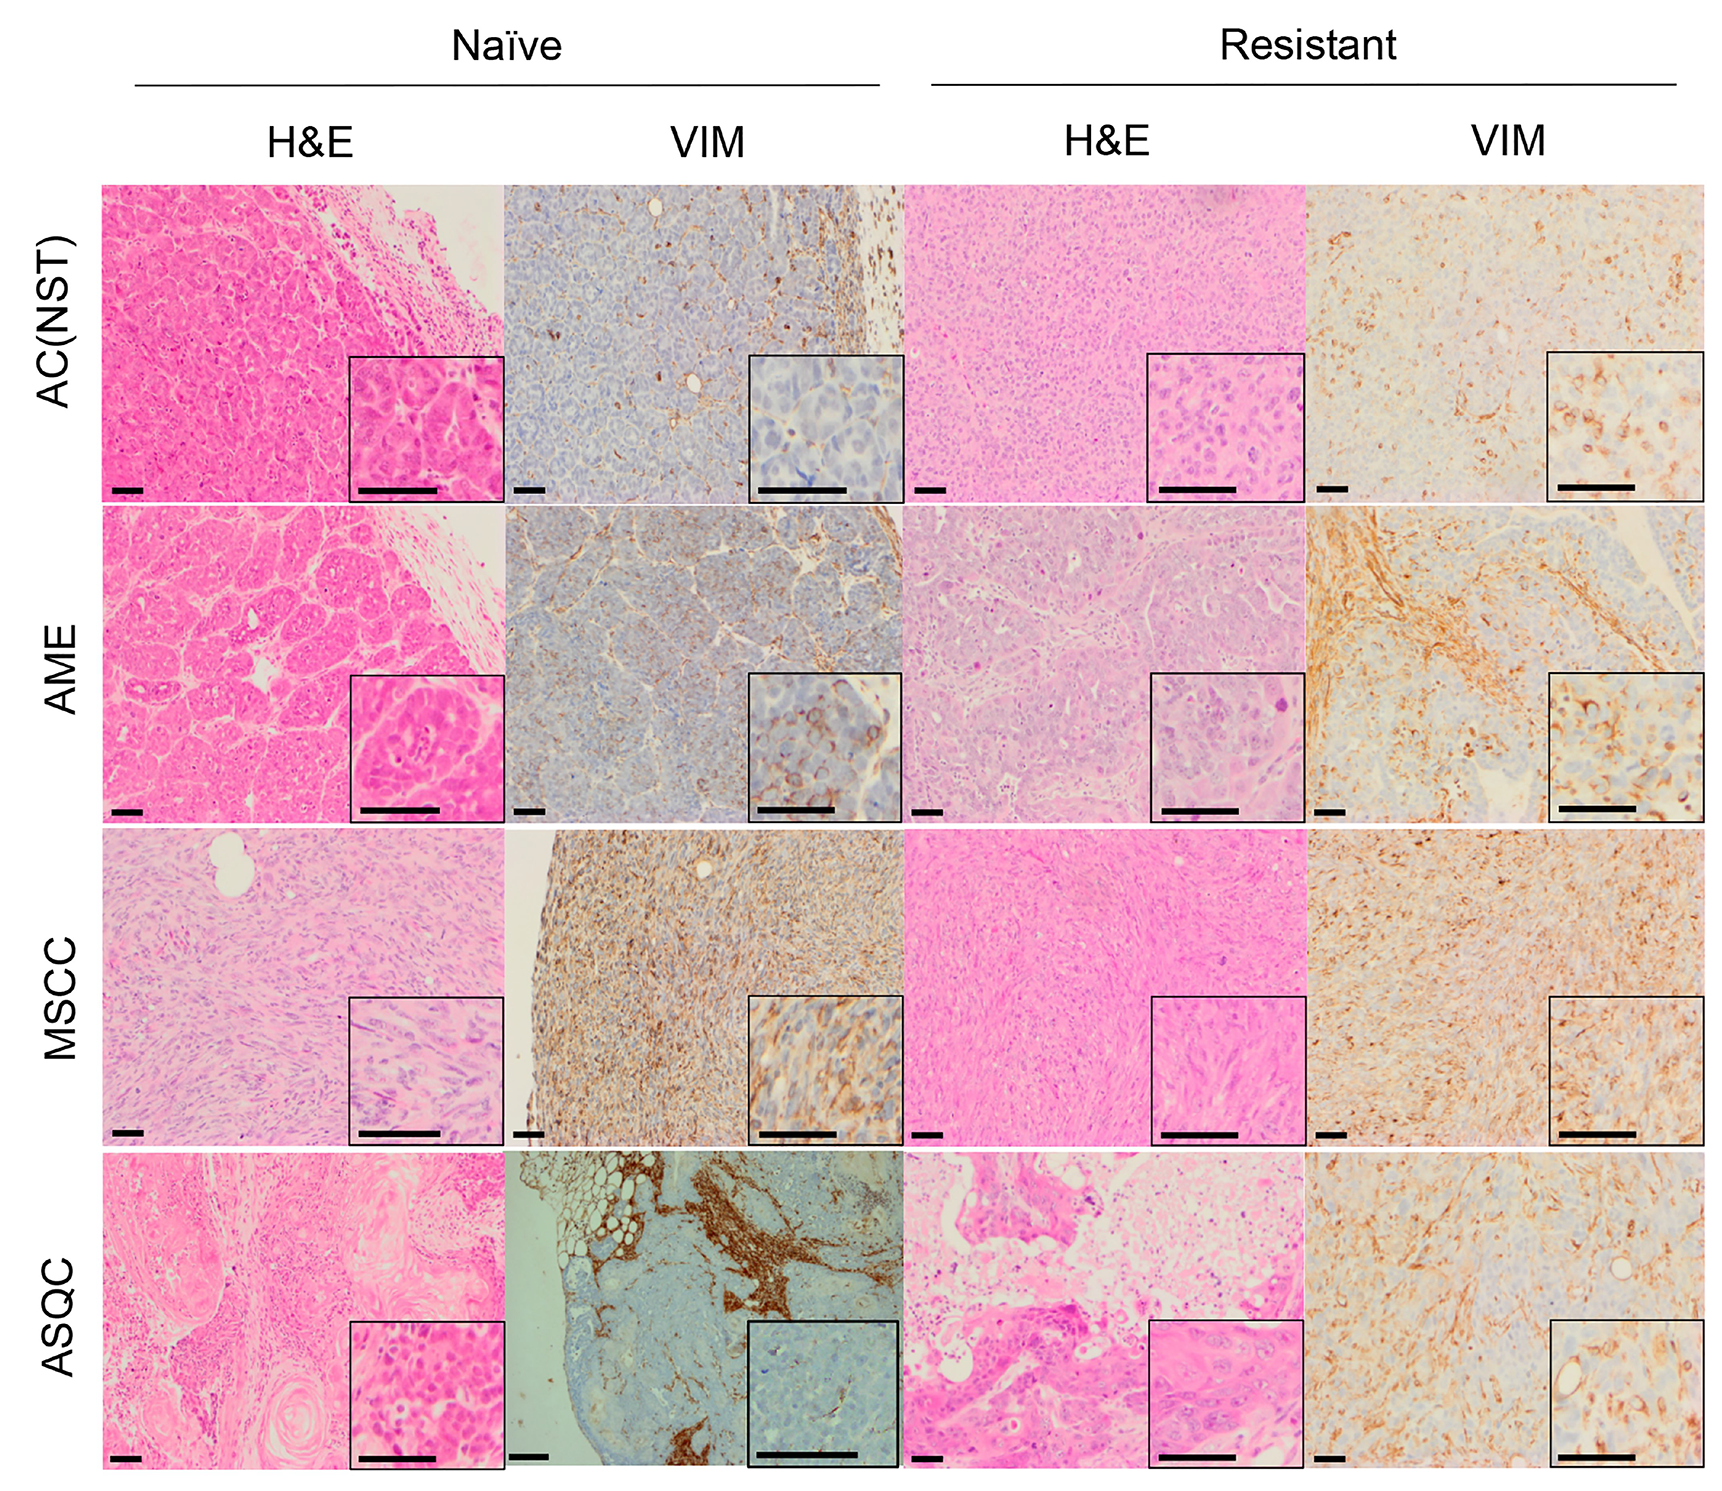 Figure 1: H&E and vimentin staining of tumour phenotypes observed in olaparib-na�ve and olaparib-resistant tumours in the Brca2/p53-mutant mammary tumour model.